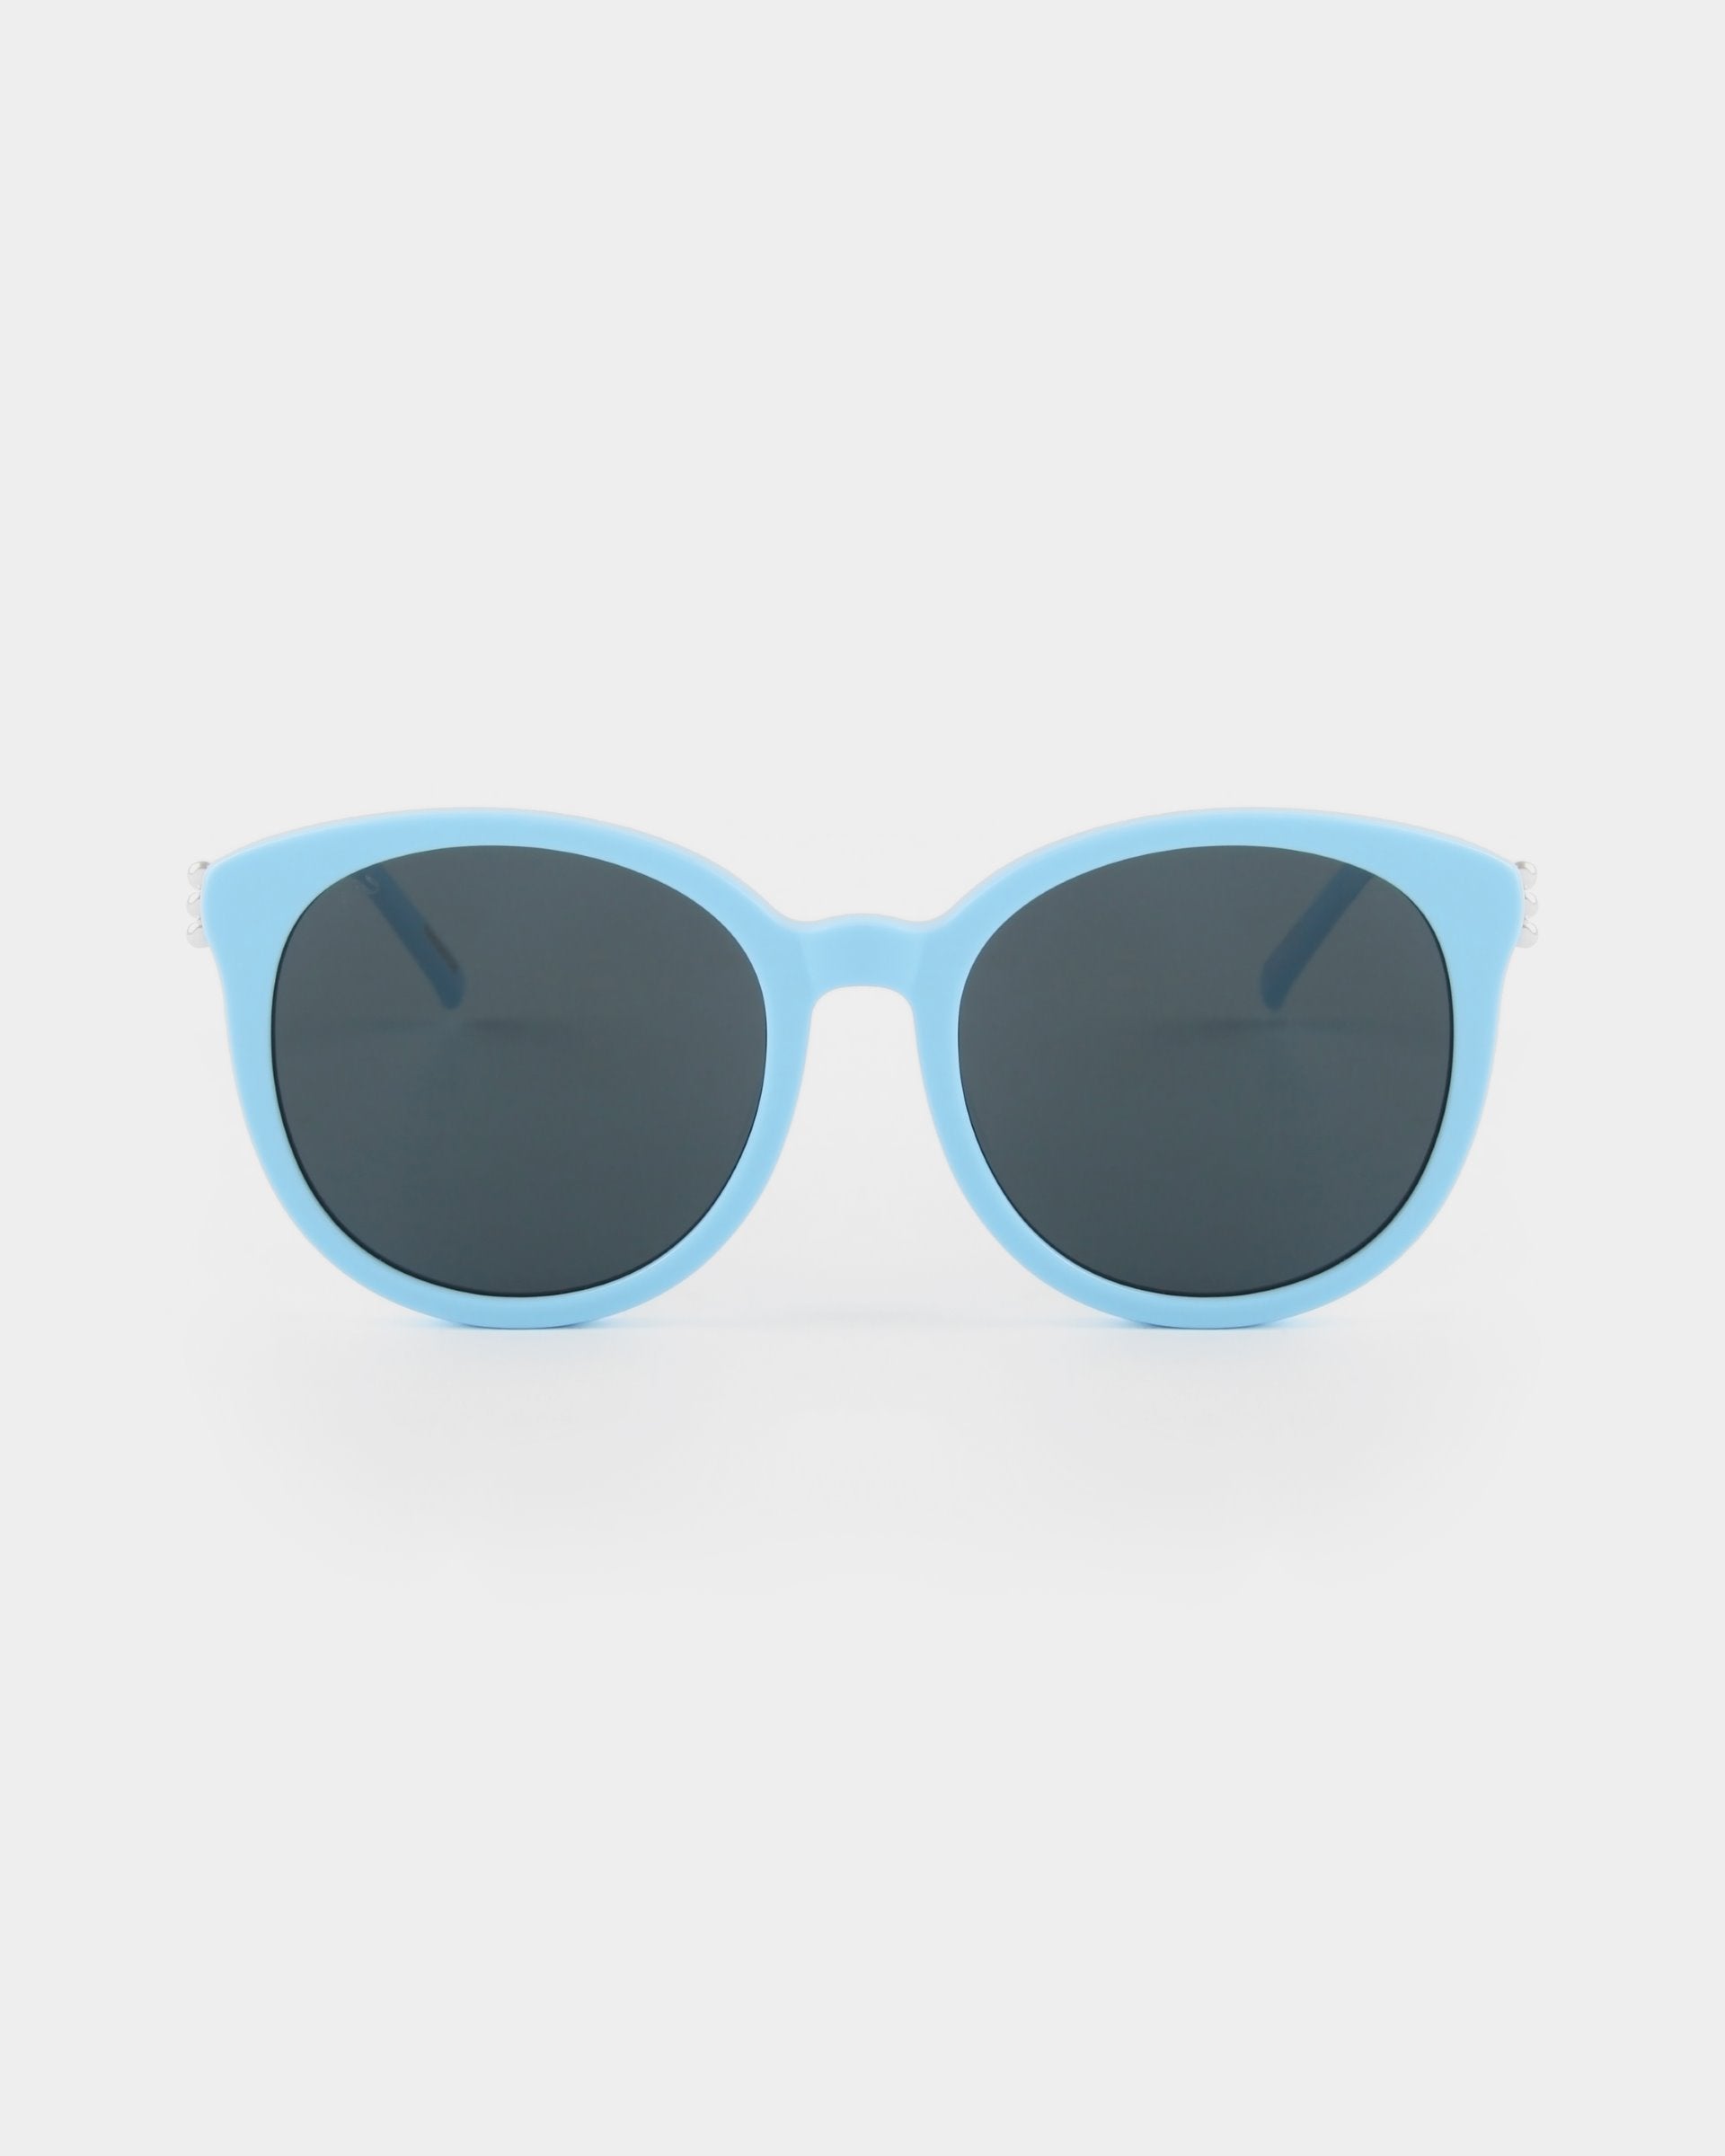 A pair of stylish Scarlett sunglasses by For Art's Sake® with shatter-resistant nylon lenses that are dark and oval-shaped, displayed against a plain white background.